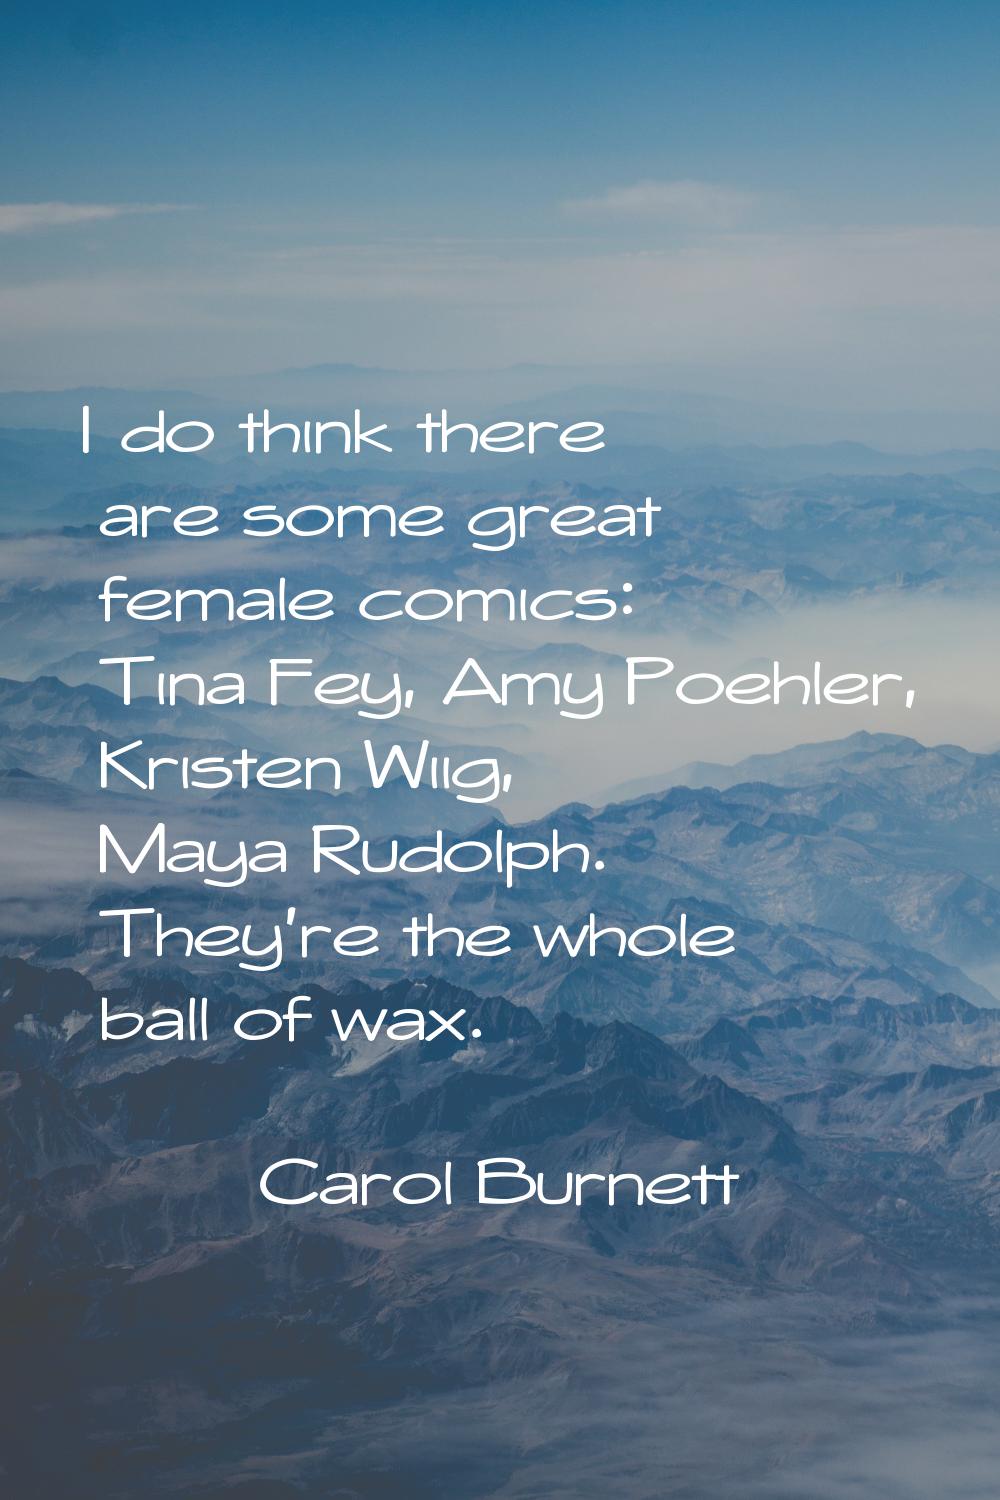 I do think there are some great female comics: Tina Fey, Amy Poehler, Kristen Wiig, Maya Rudolph. T